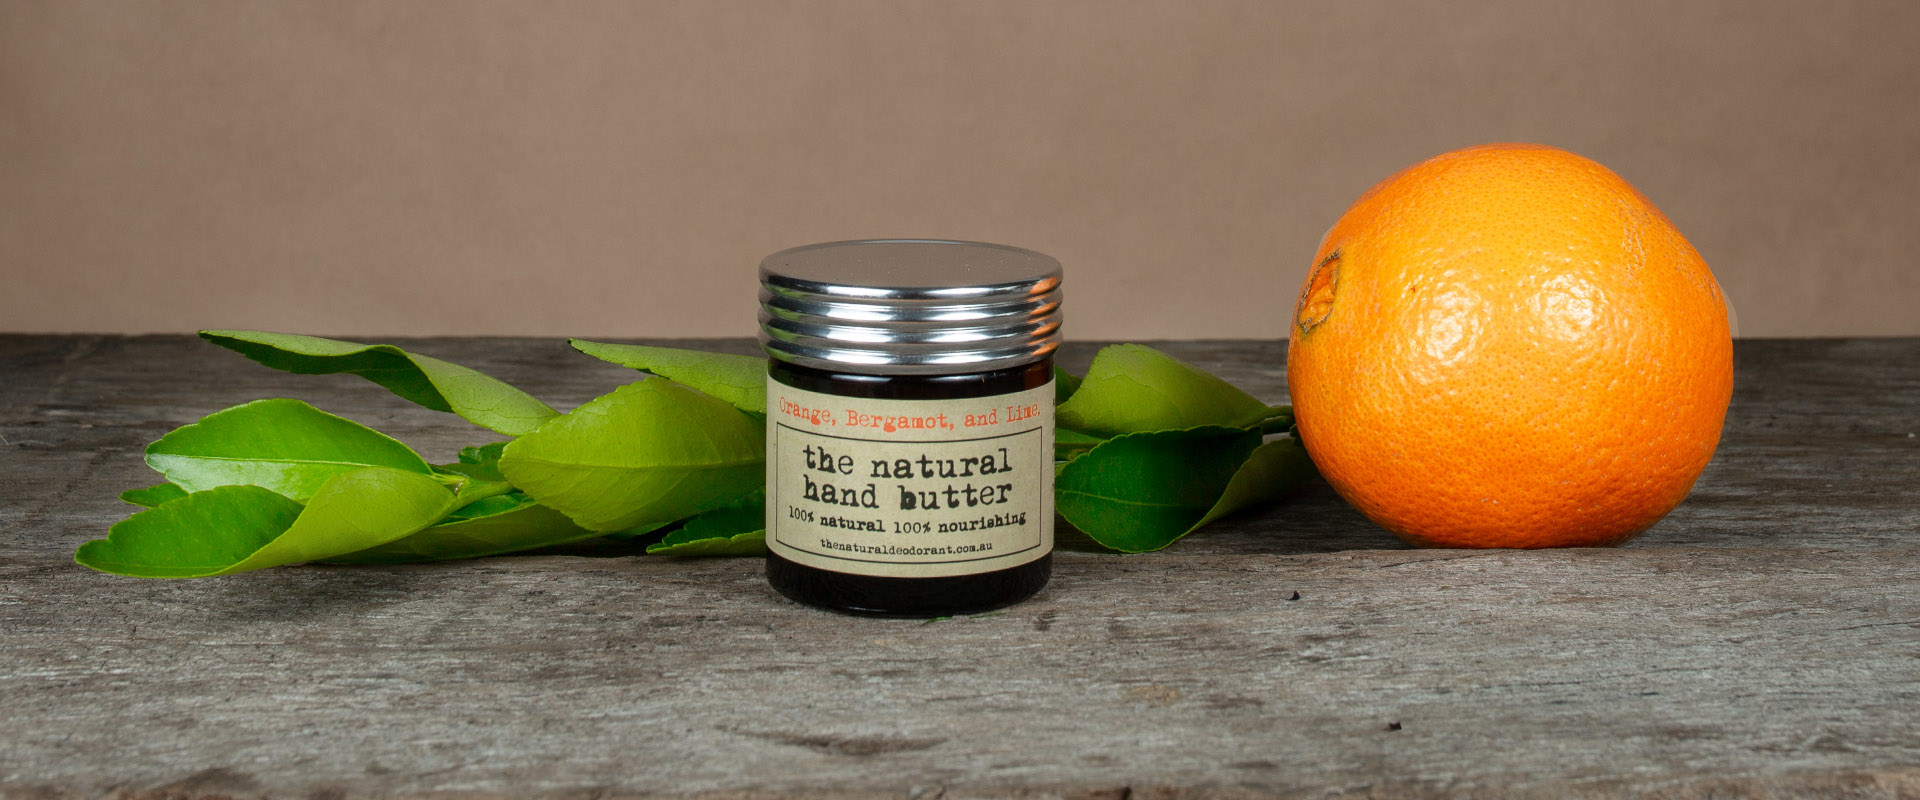 The Natural Deodorant Hand Butter (Orange), The Natural Deodorant